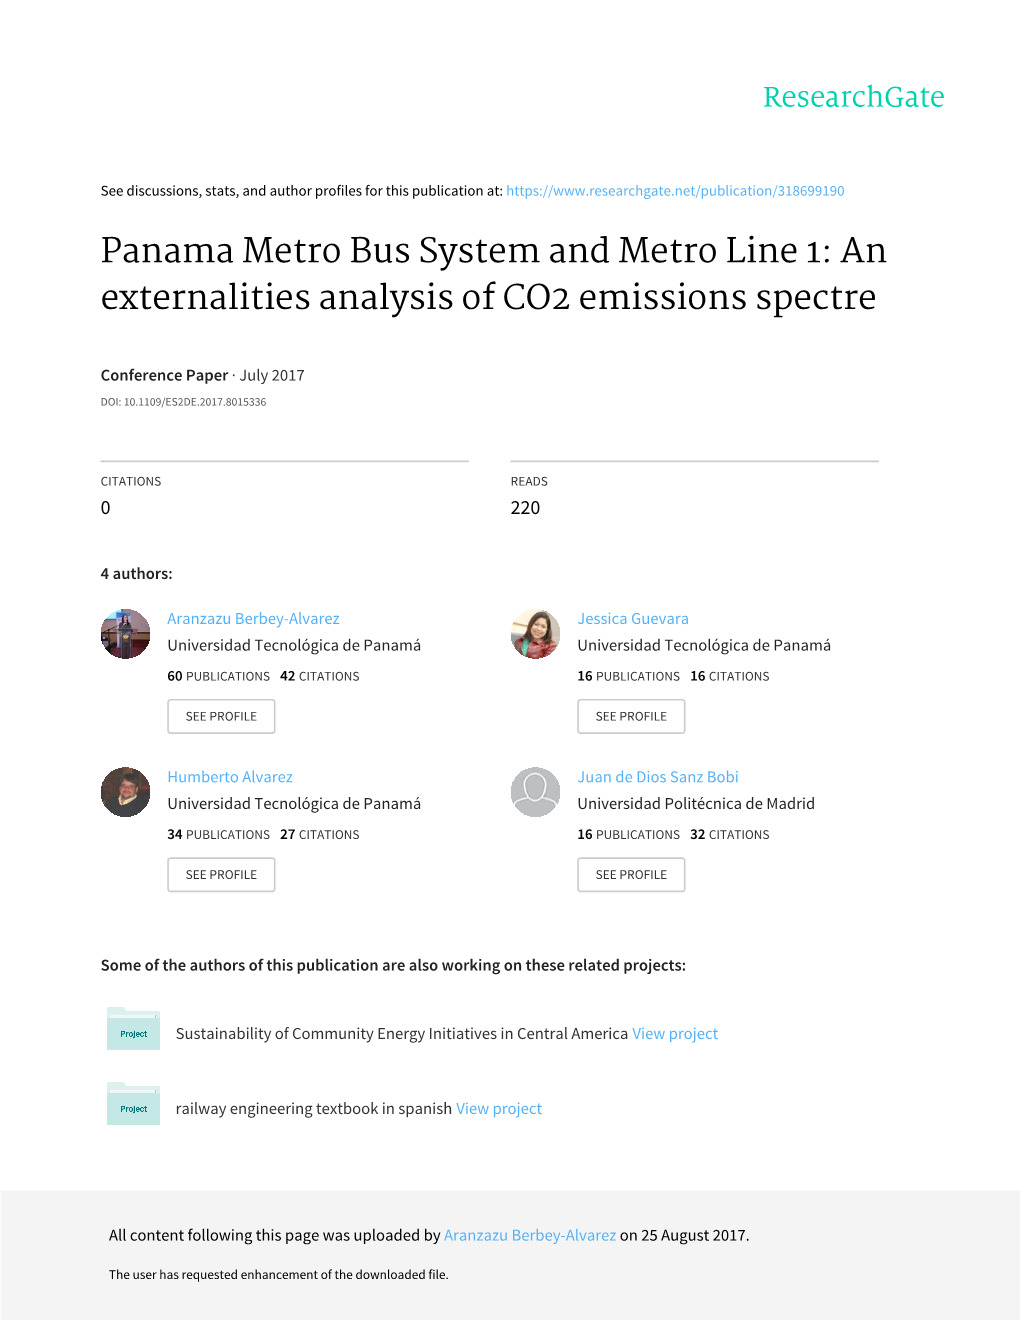 Panama Metro Bus System and Metro Line 1: an Externalities Analysis of CO2 Emissions Spectre